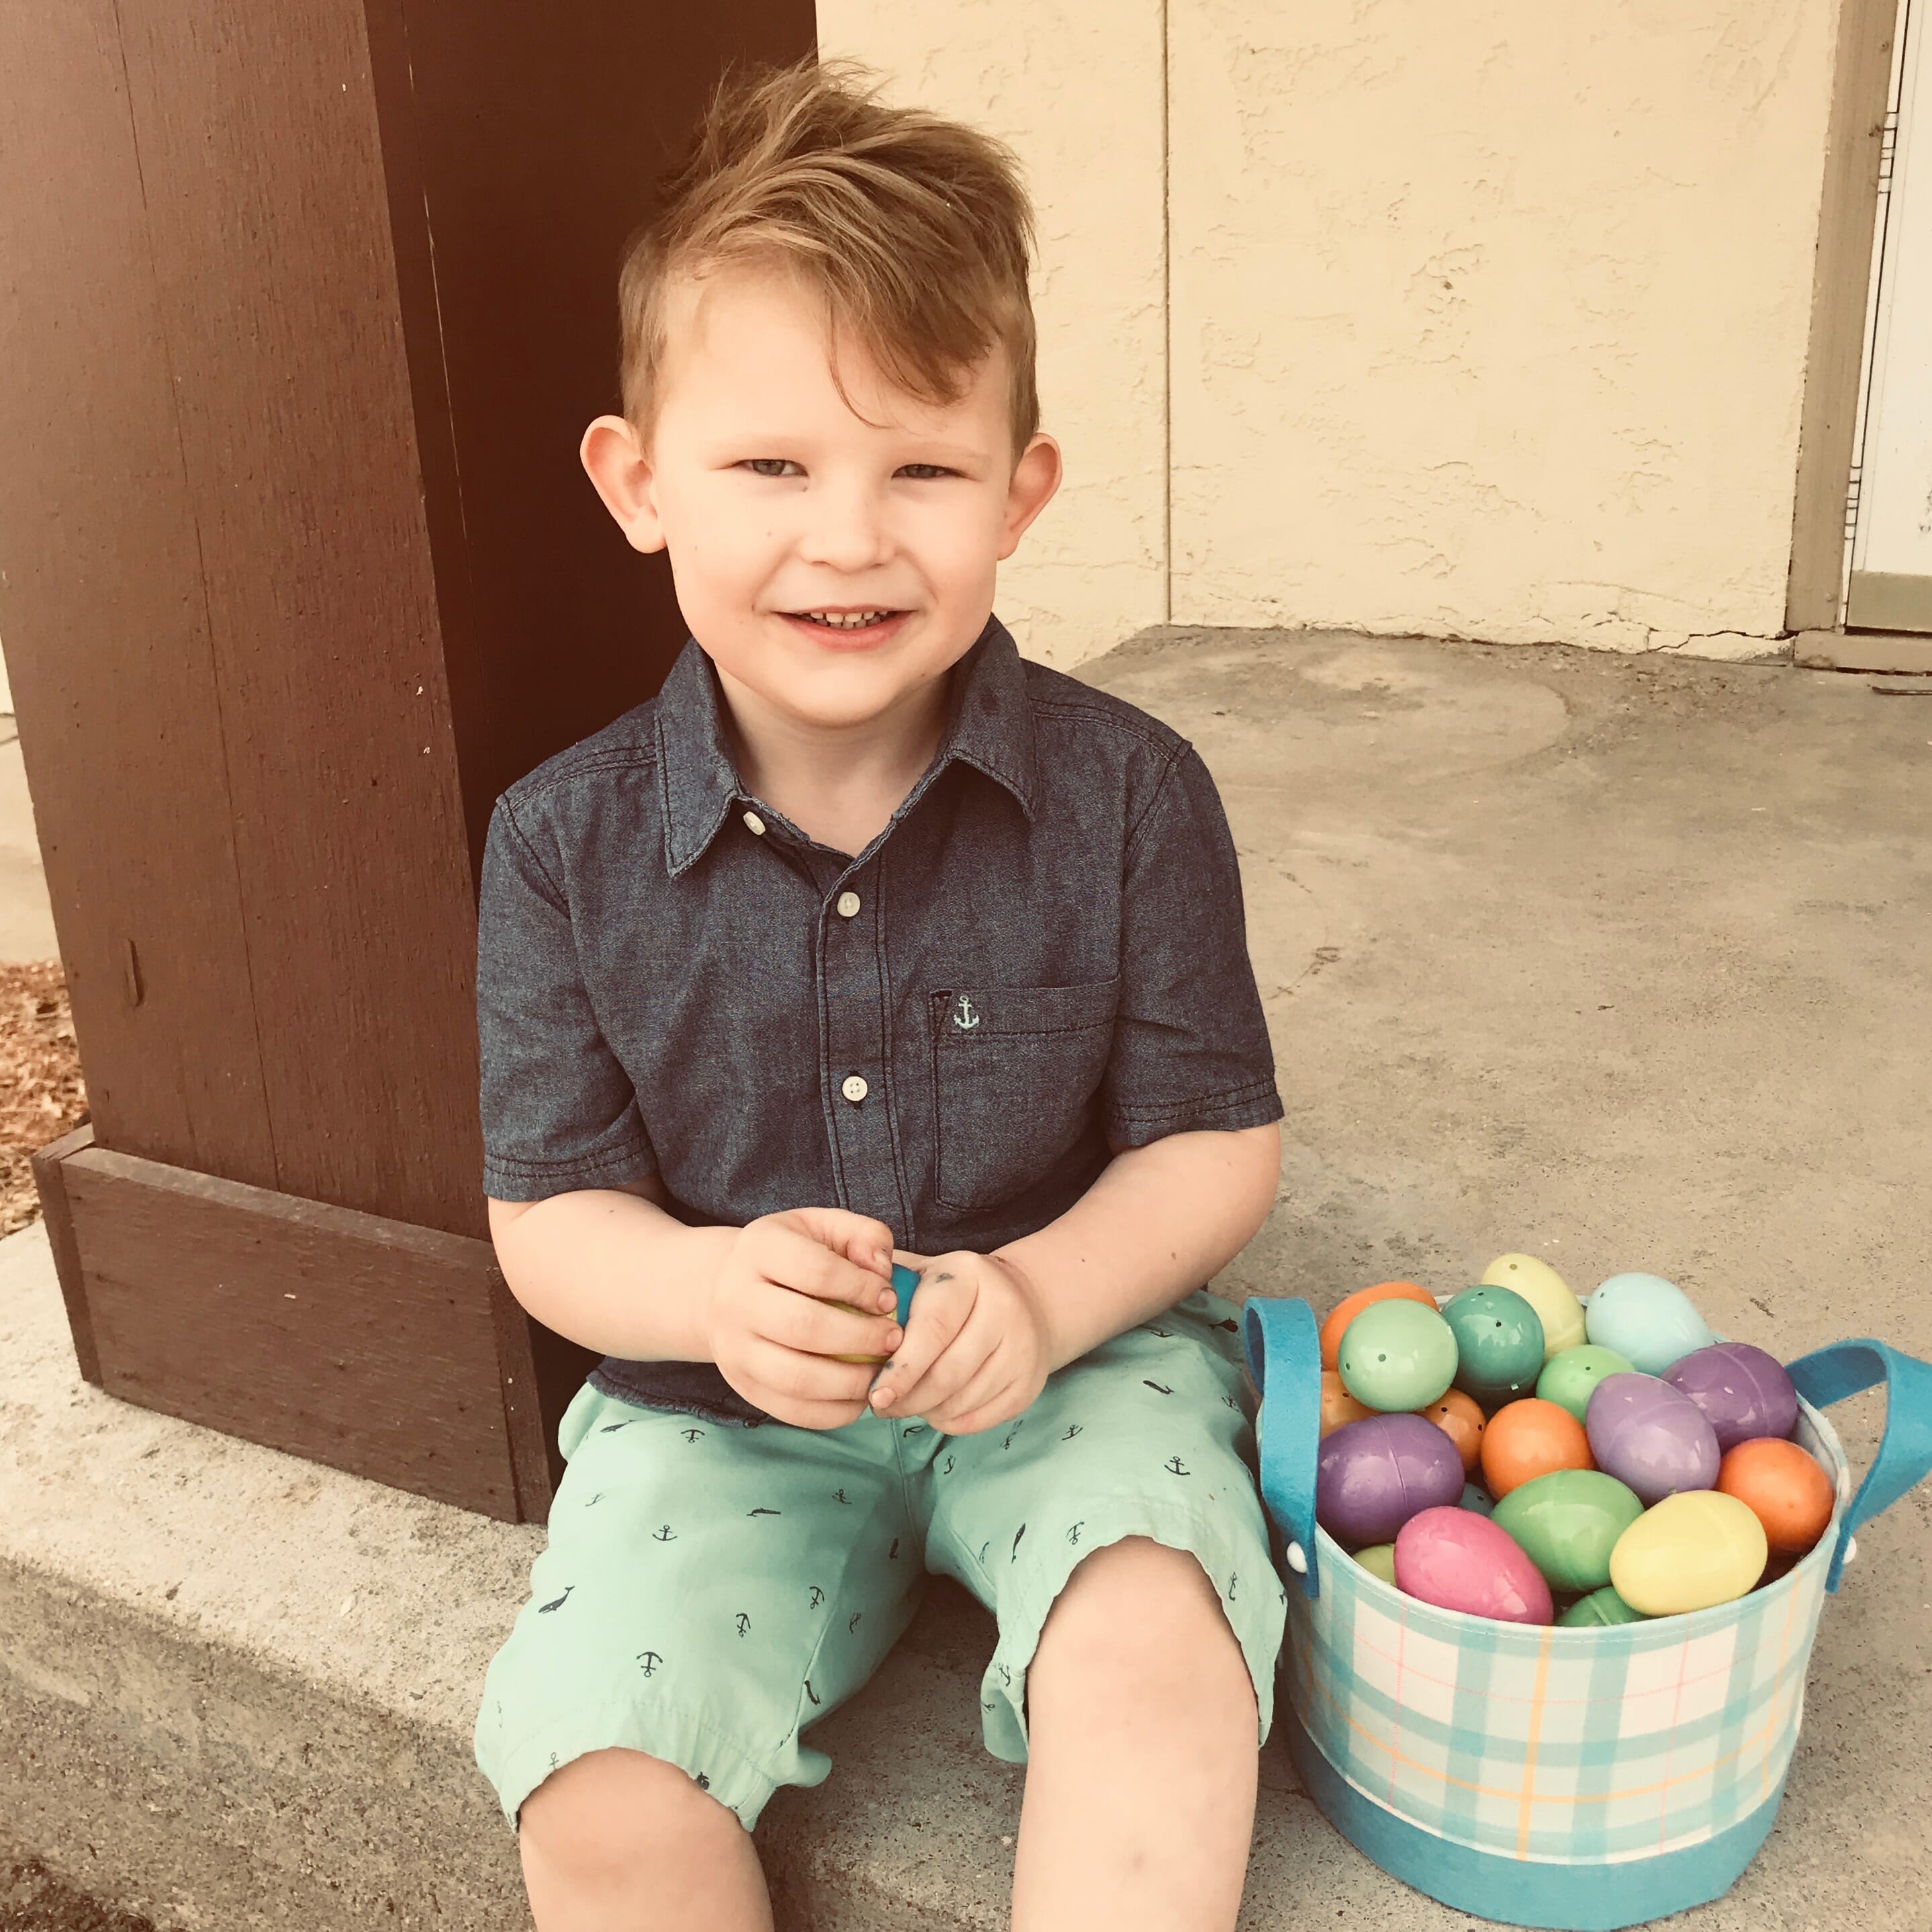 Kelli's son showing off his Easter eggs